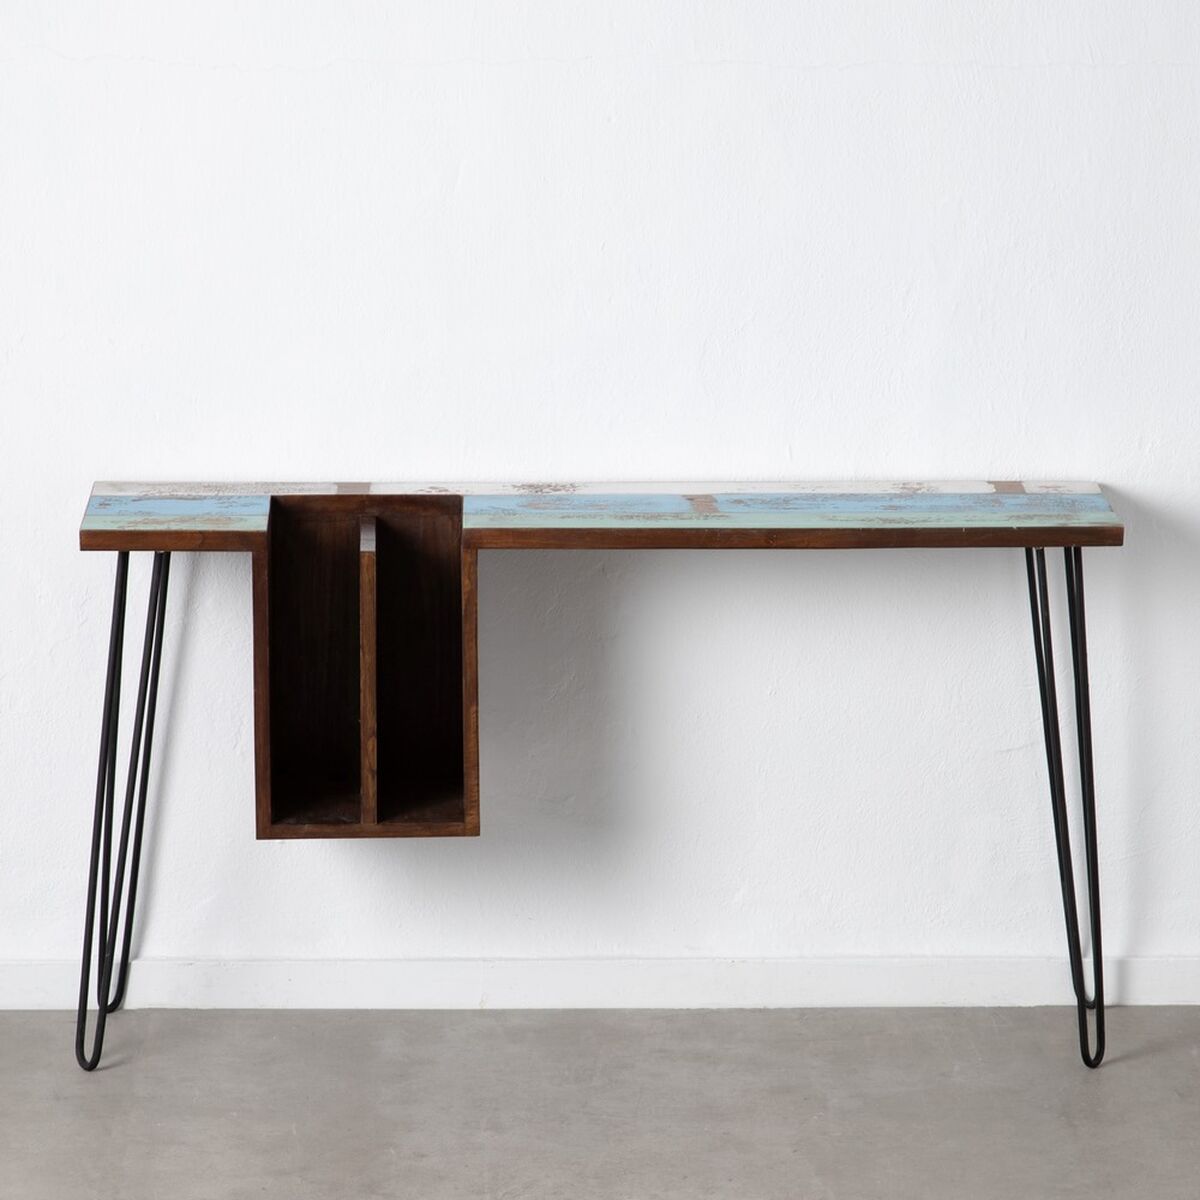 Desk in Metal and Wood (140 x 35 x 77 cm)